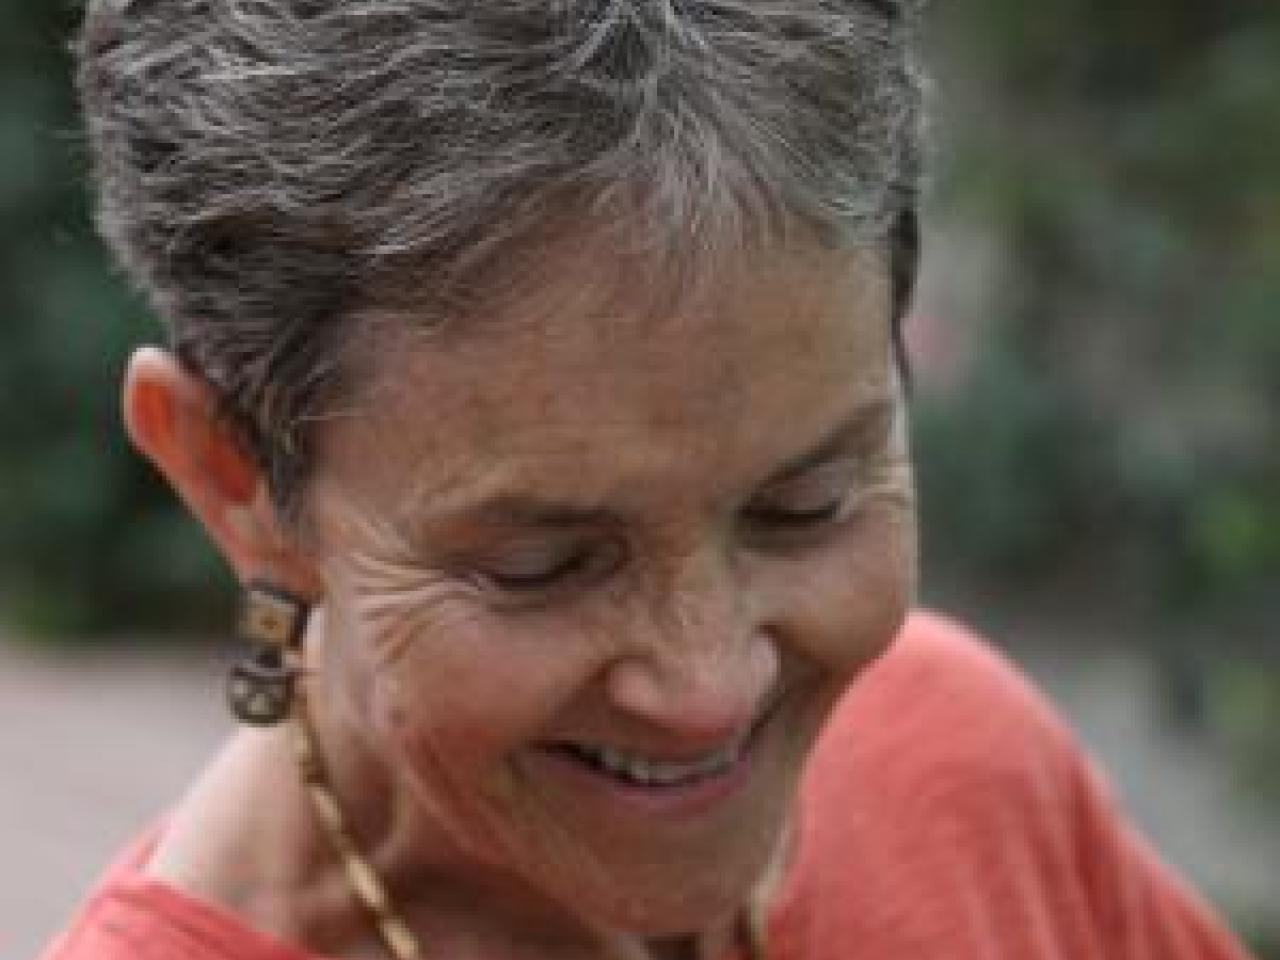 An image from the New Day film States of Grace. Dr. Grace Dammann closes her eyes and smiles towards the ground, her body tilted slightly. Her gray and white hair is short and she wears earrings, a necklace and a long sleeved shirt. The background is full of blurred out foliage.